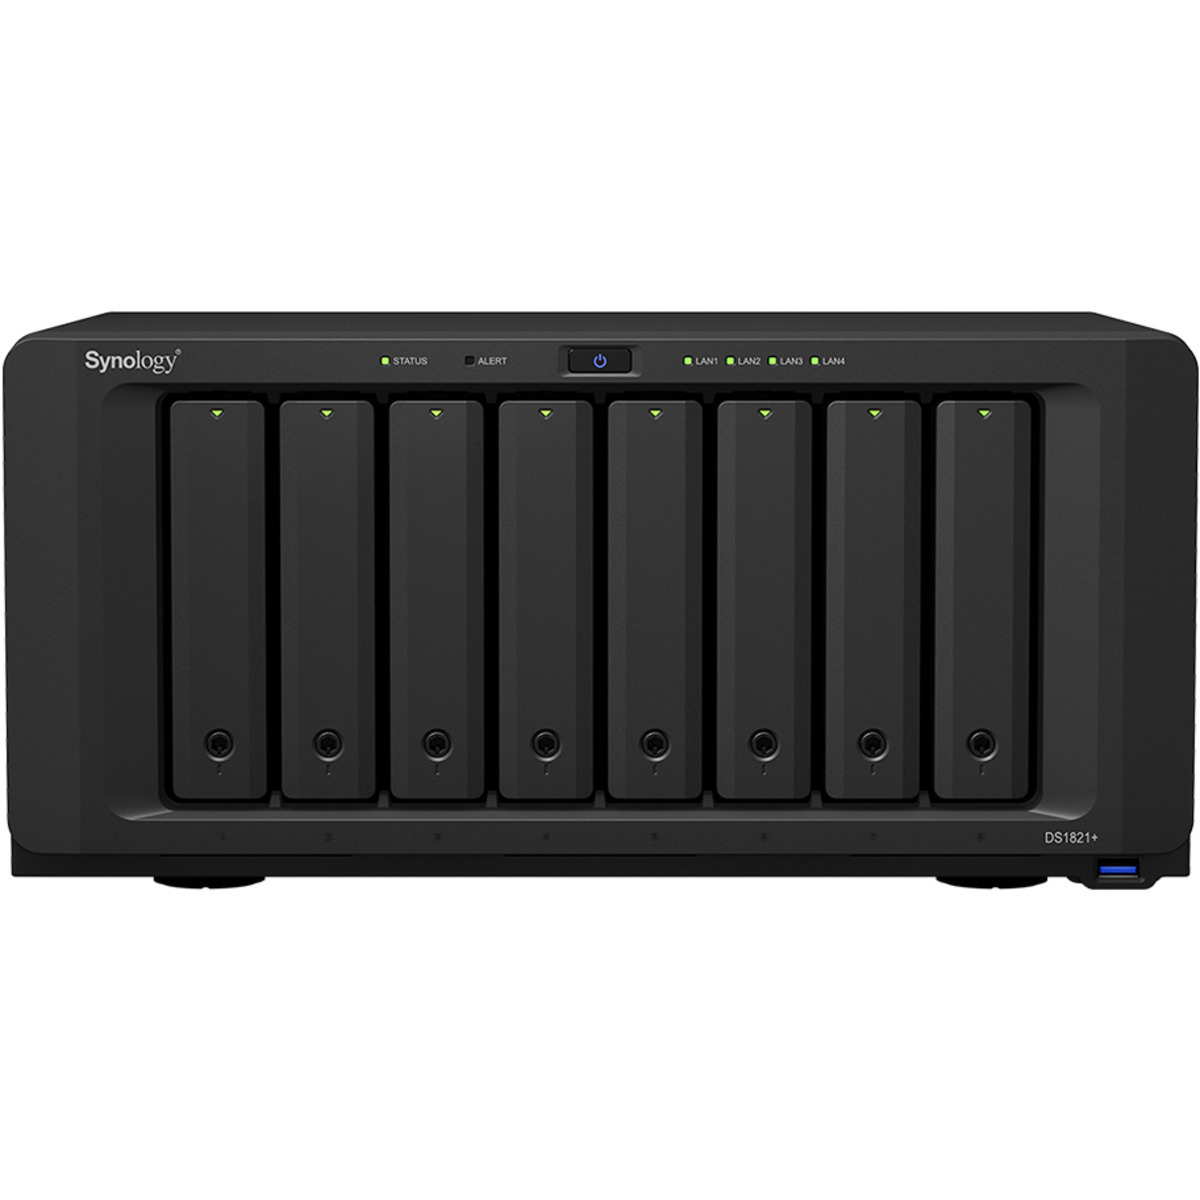 Synology DiskStation DS1821+ 14tb 8-Bay Desktop Multimedia / Power User / Business NAS - Network Attached Storage Device 7x2tb Western Digital Red Plus WD20EFZX 3.5 5400rpm SATA 6Gb/s HDD NAS Class Drives Installed - Burn-In Tested - FREE RAM UPGRADE DiskStation DS1821+